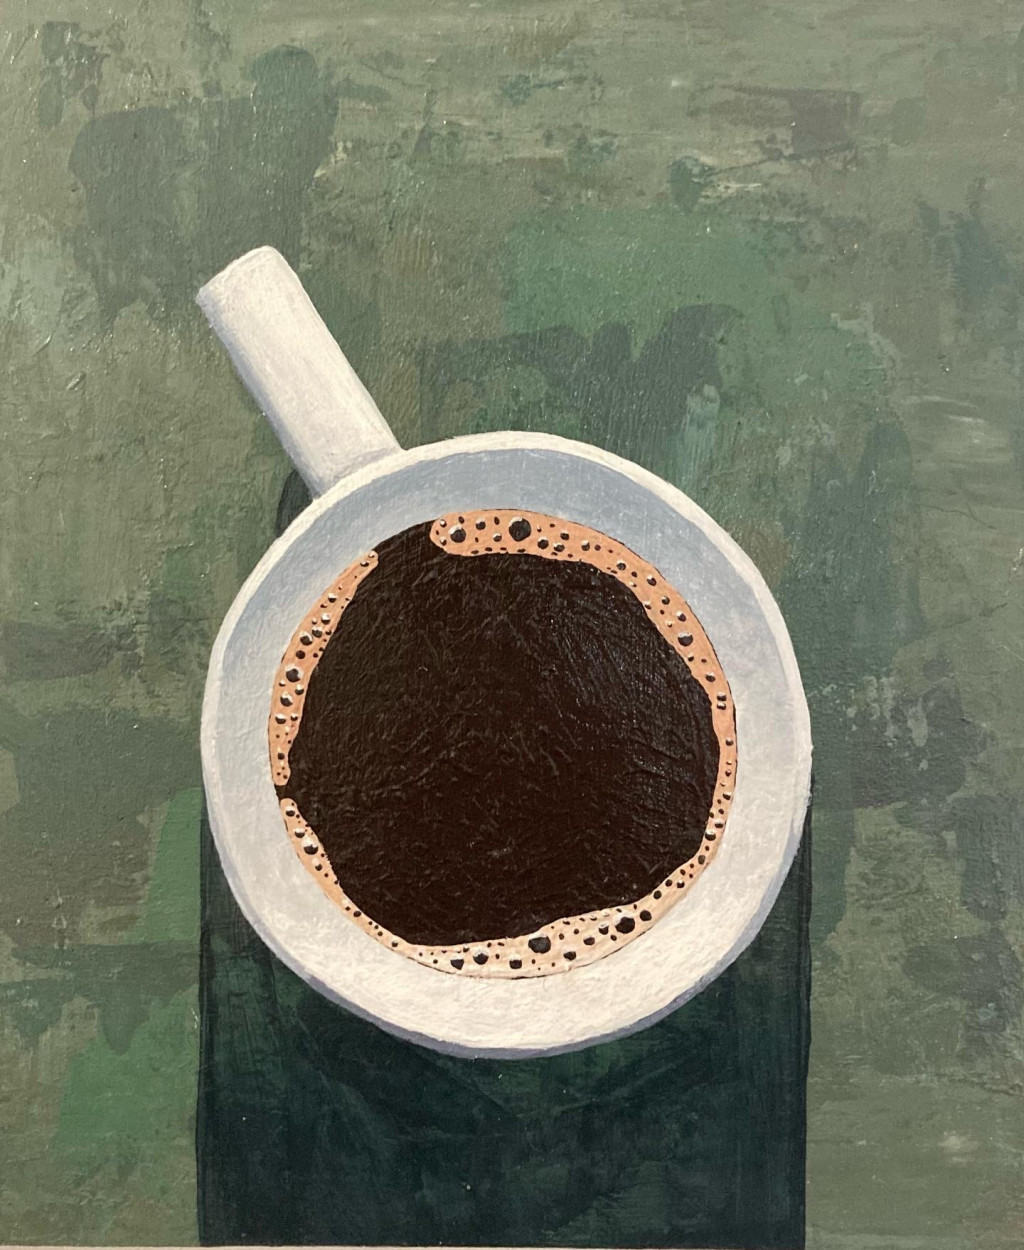 A painting of a cup of coffee from directly above against a green roughly textured background